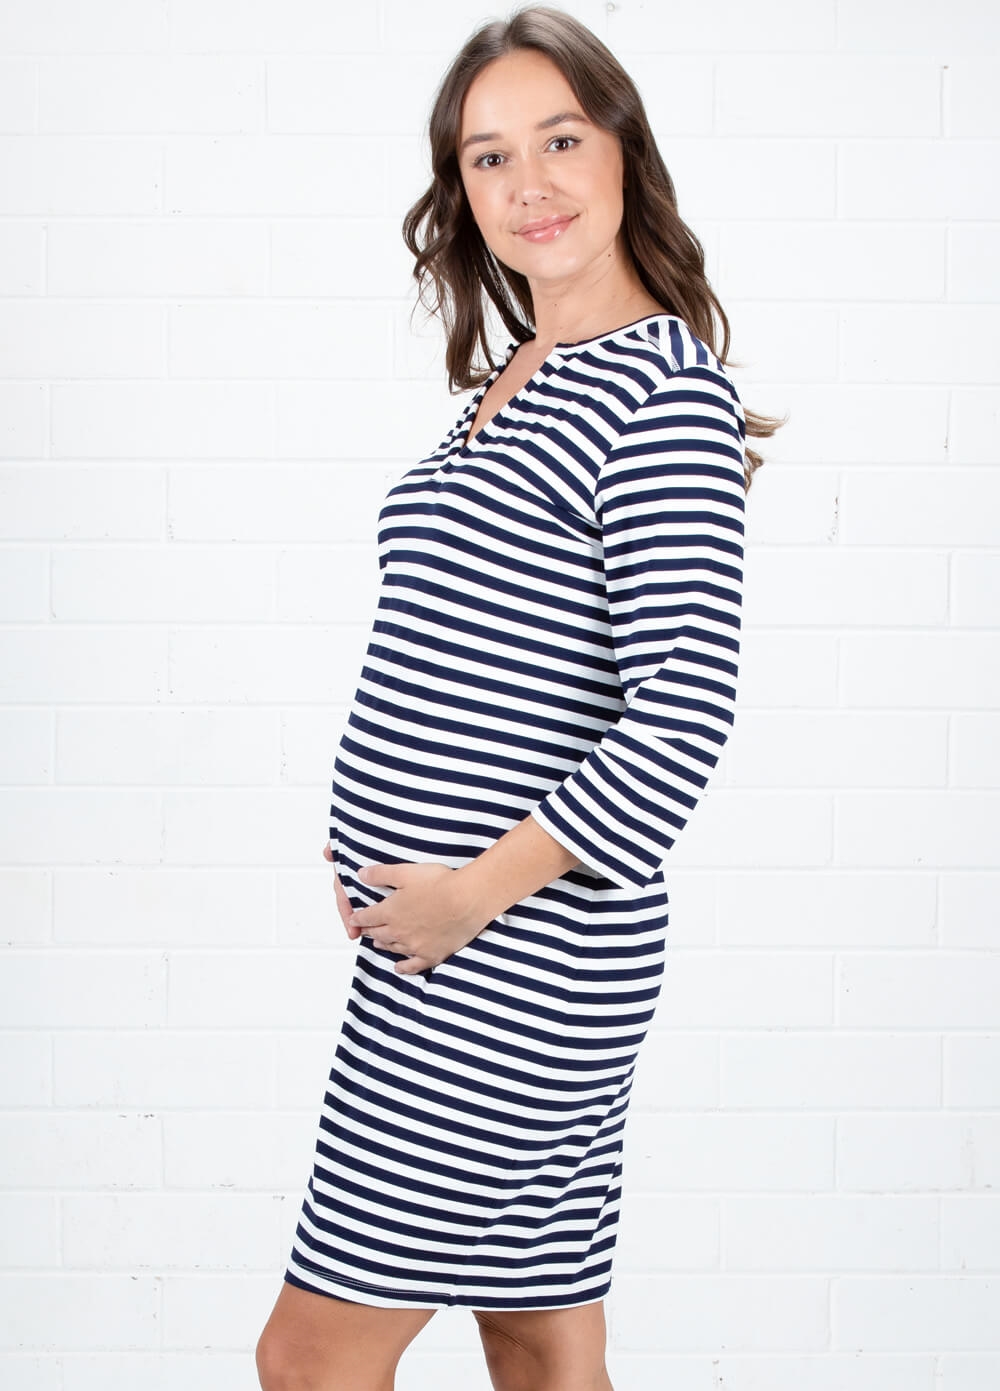 Maternity Travel Dress in Blue Stripes by Queen mum